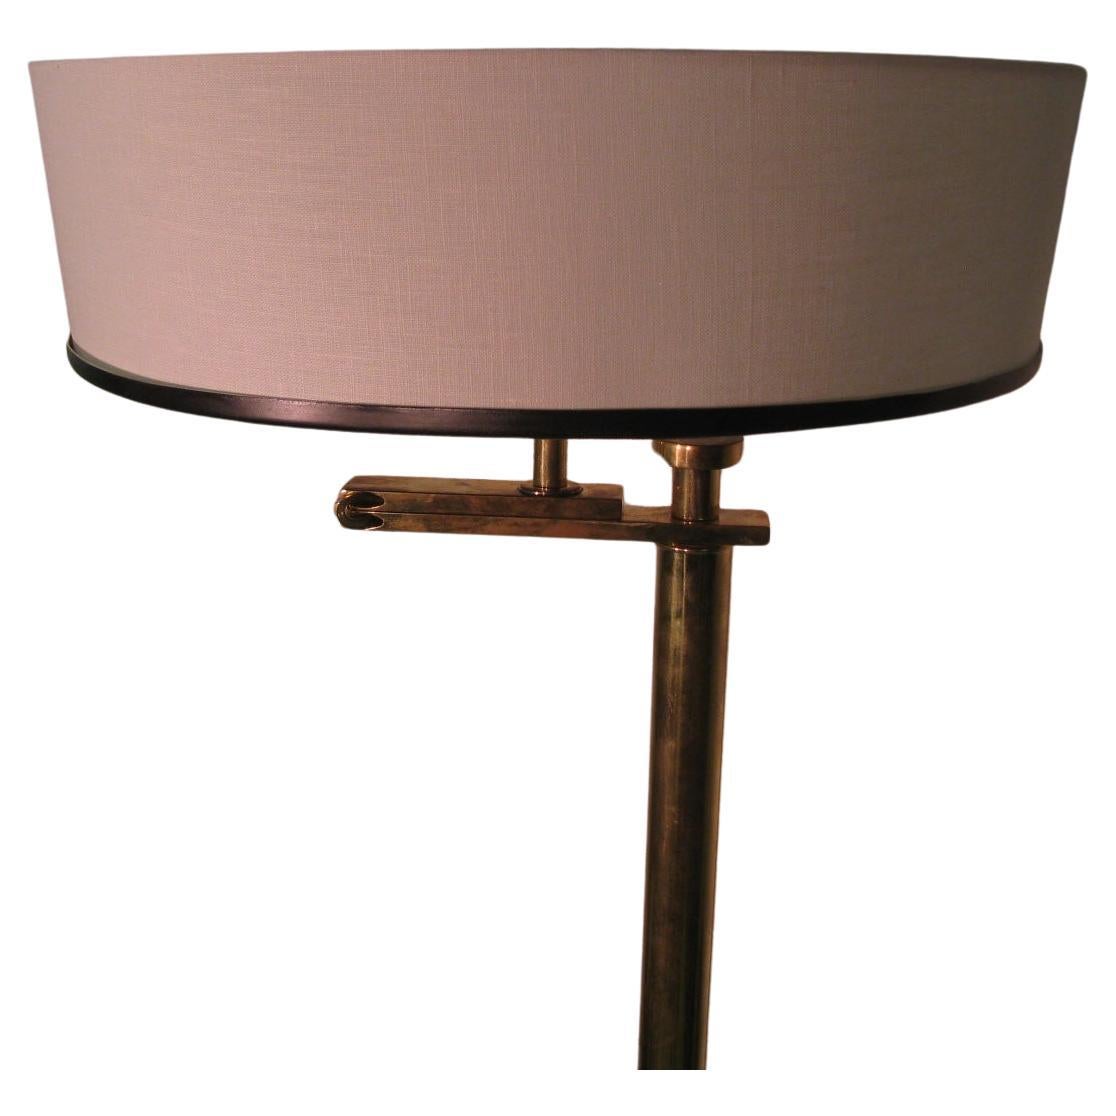 Art Deco Mid-Century Modern Reading or Torchiere Flip Lamp by Kurt Versen In Good Condition For Sale In Port Jervis, NY